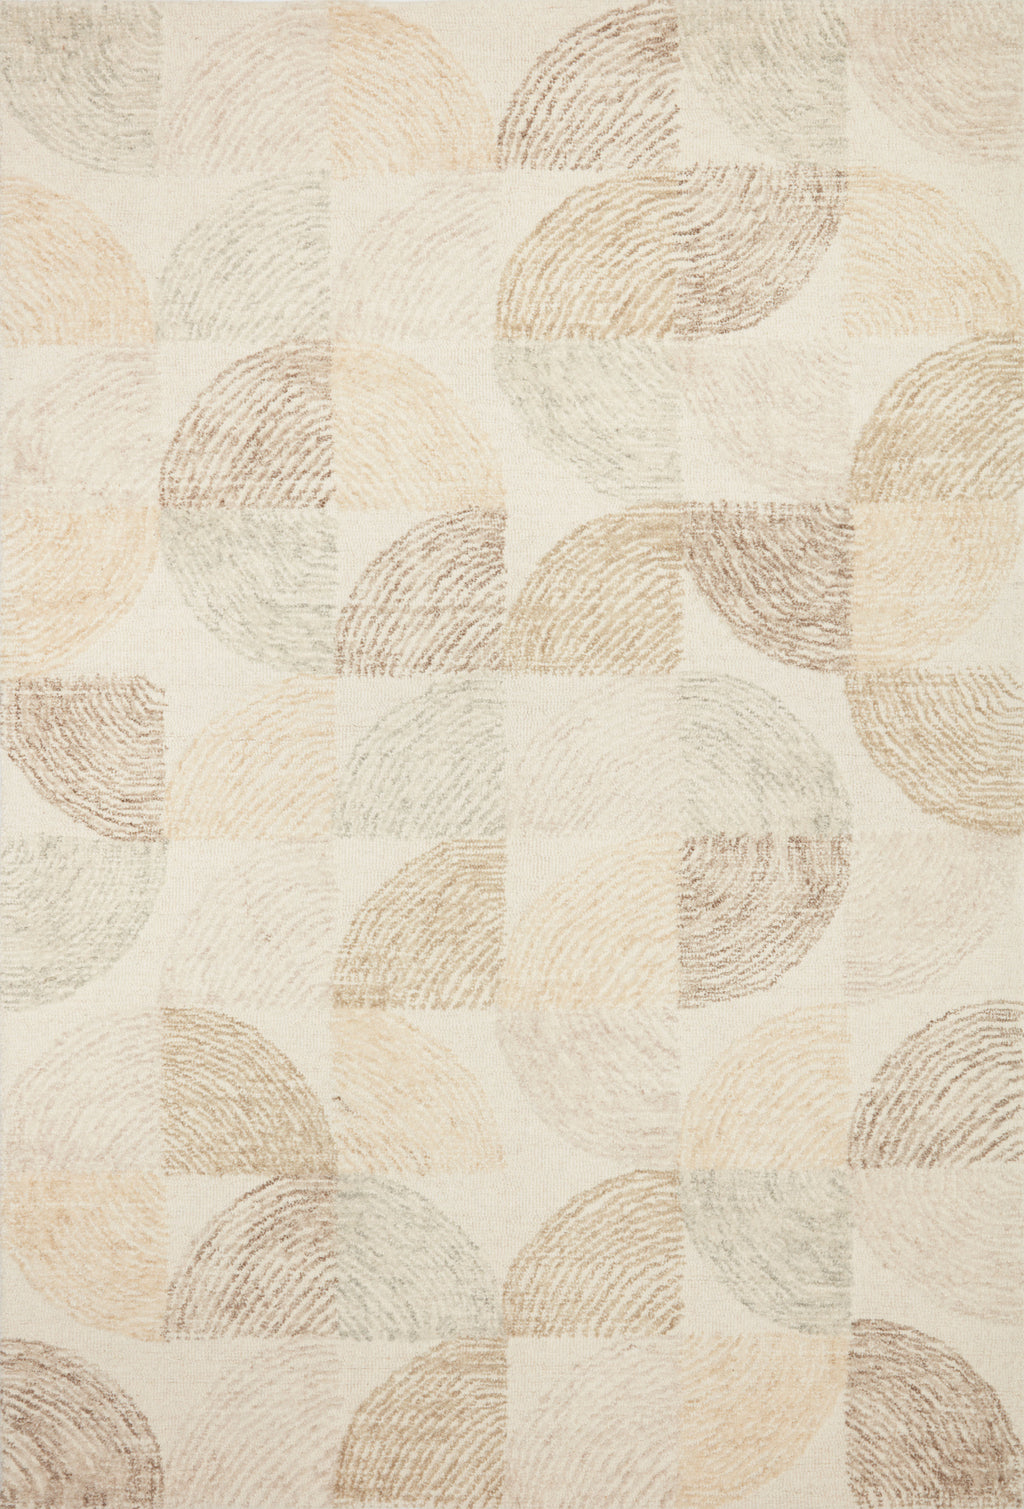 MILO Collection Wool Rug  in  Pebble / Multi Beige Accent Hand-Tufted Wool